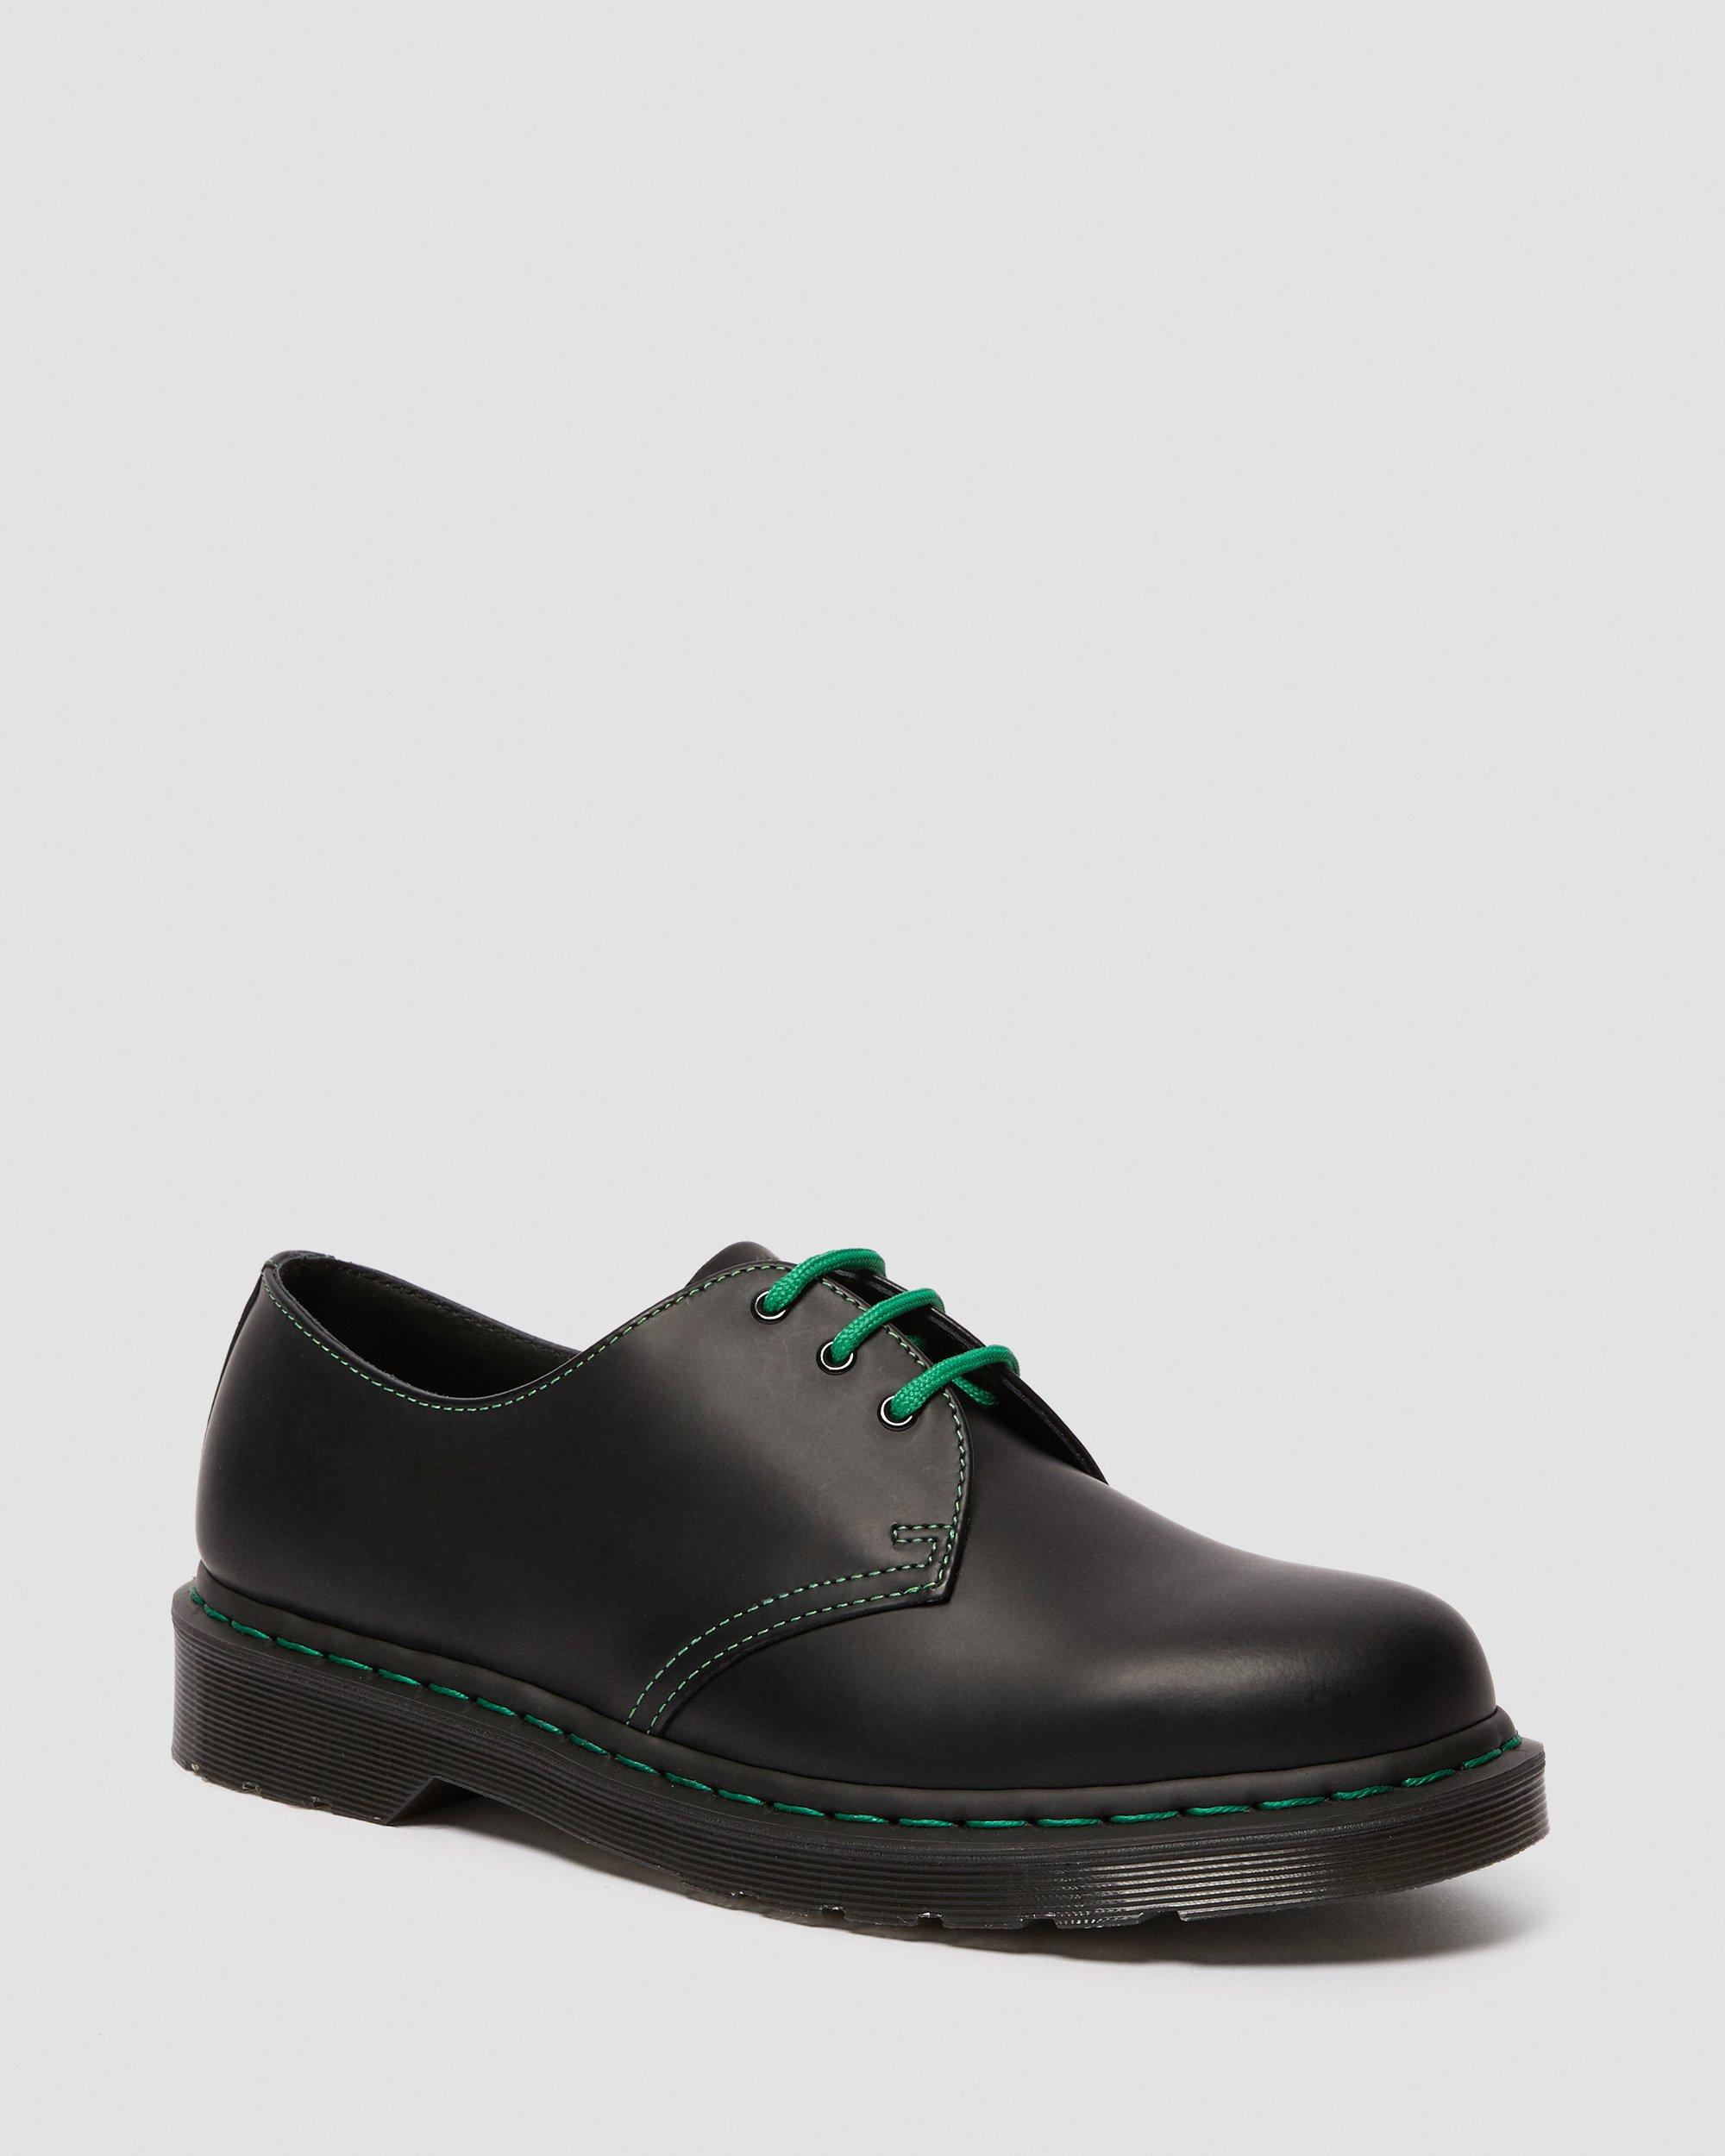 1461 Contrast Stitch Smooth Leather Oxford Shoes, Black